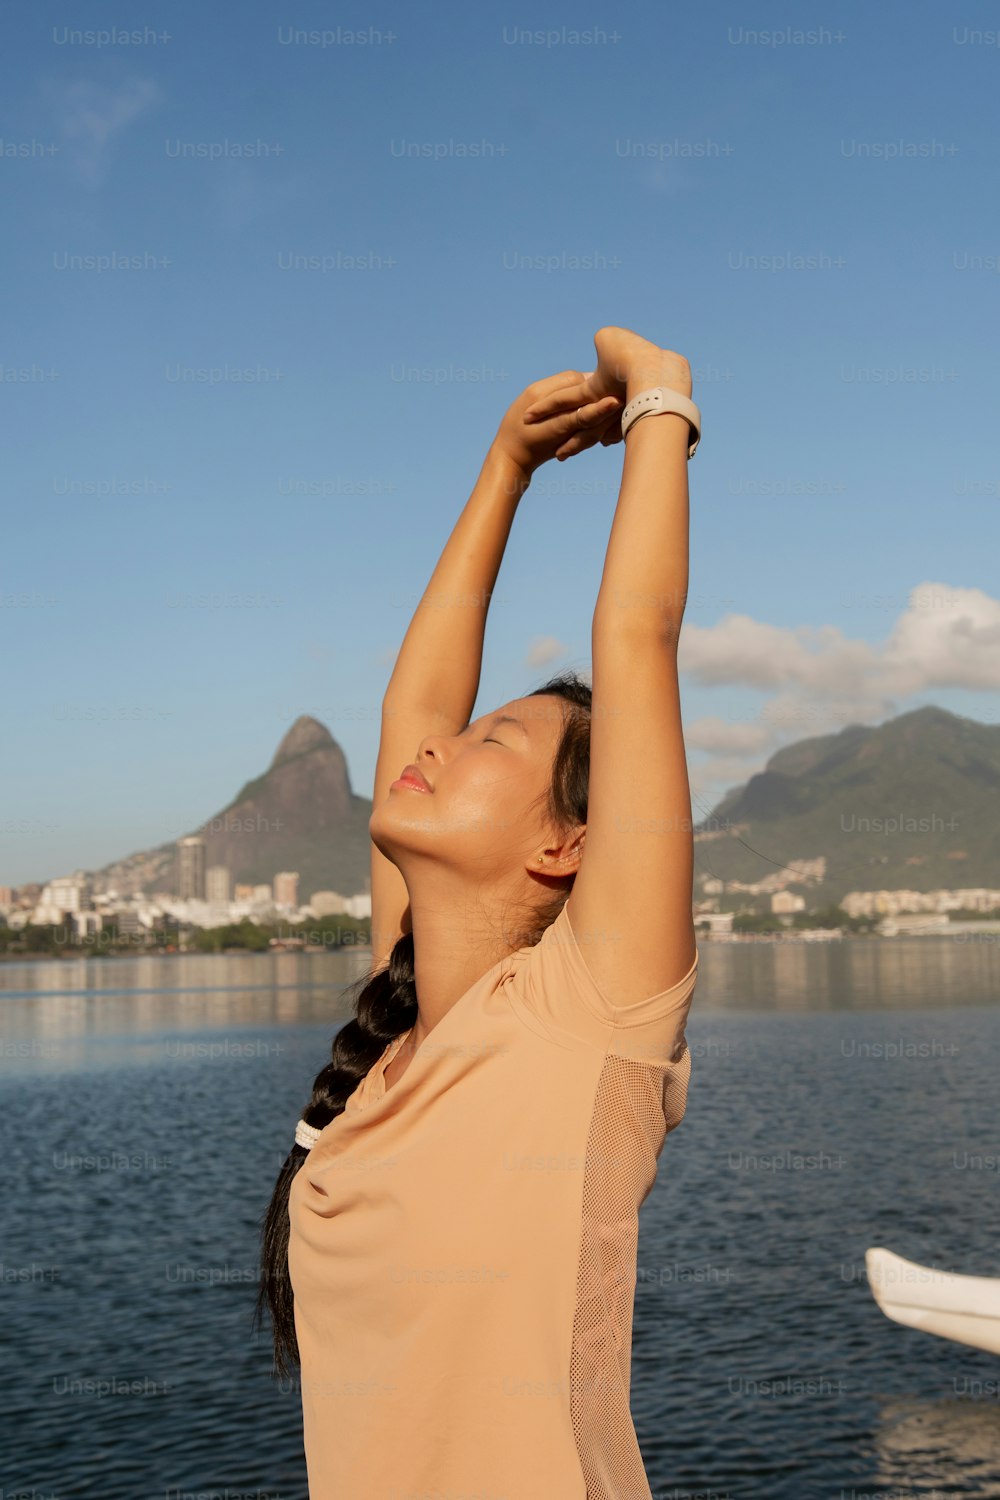 a woman stretching her arms in front of a body of water